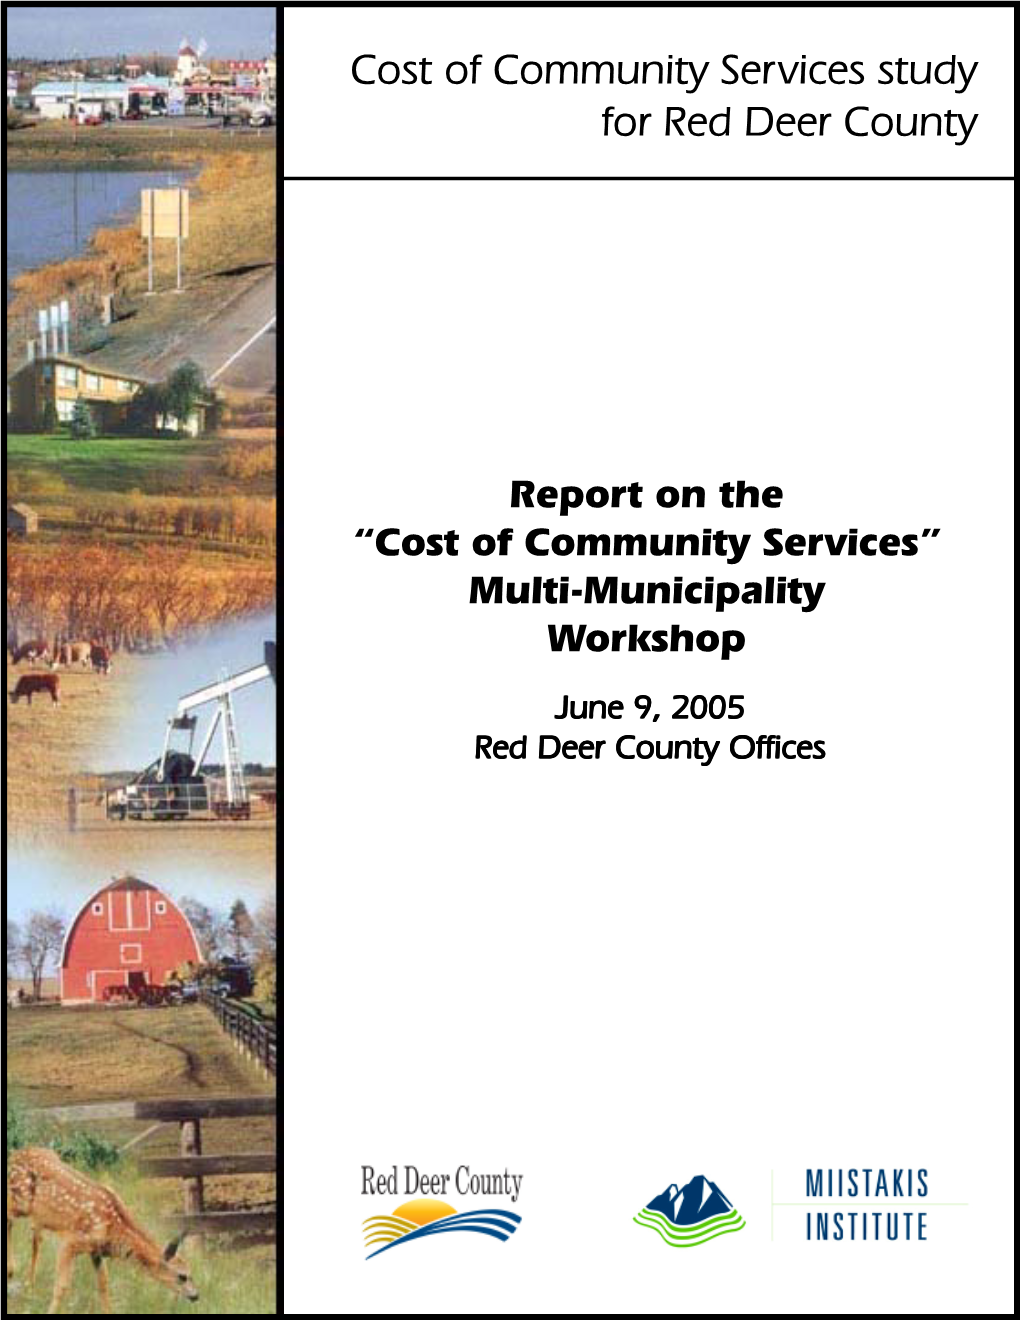 Cost of Community Services Study for Red Deer County